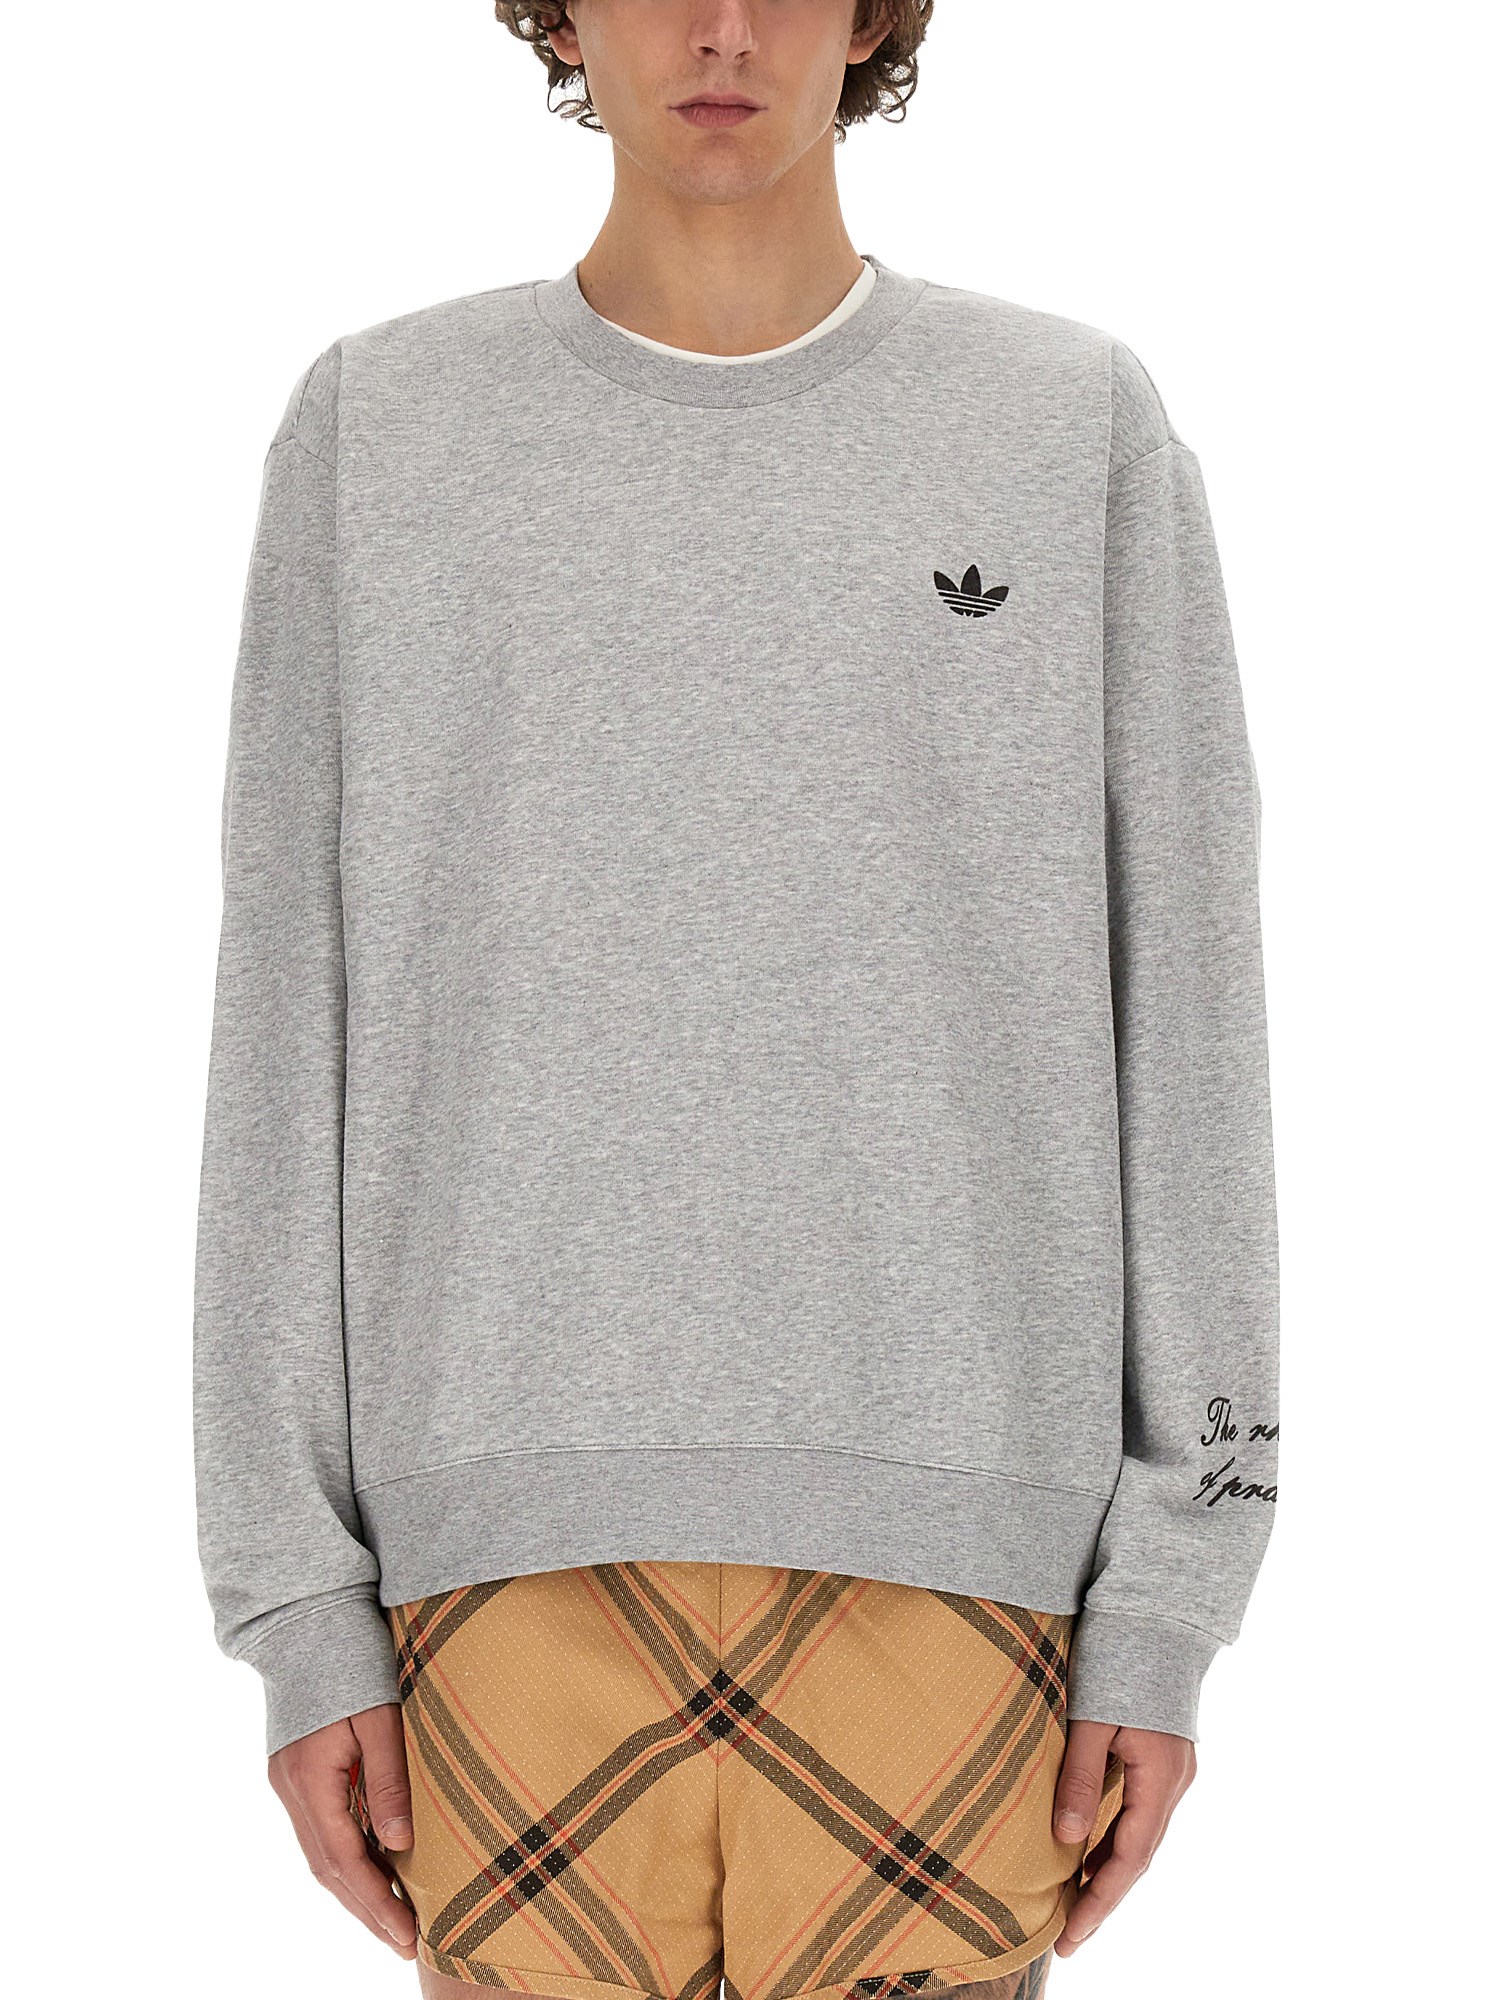 adidas x wales bonner adidas x wales bonner sweatshirt with logo